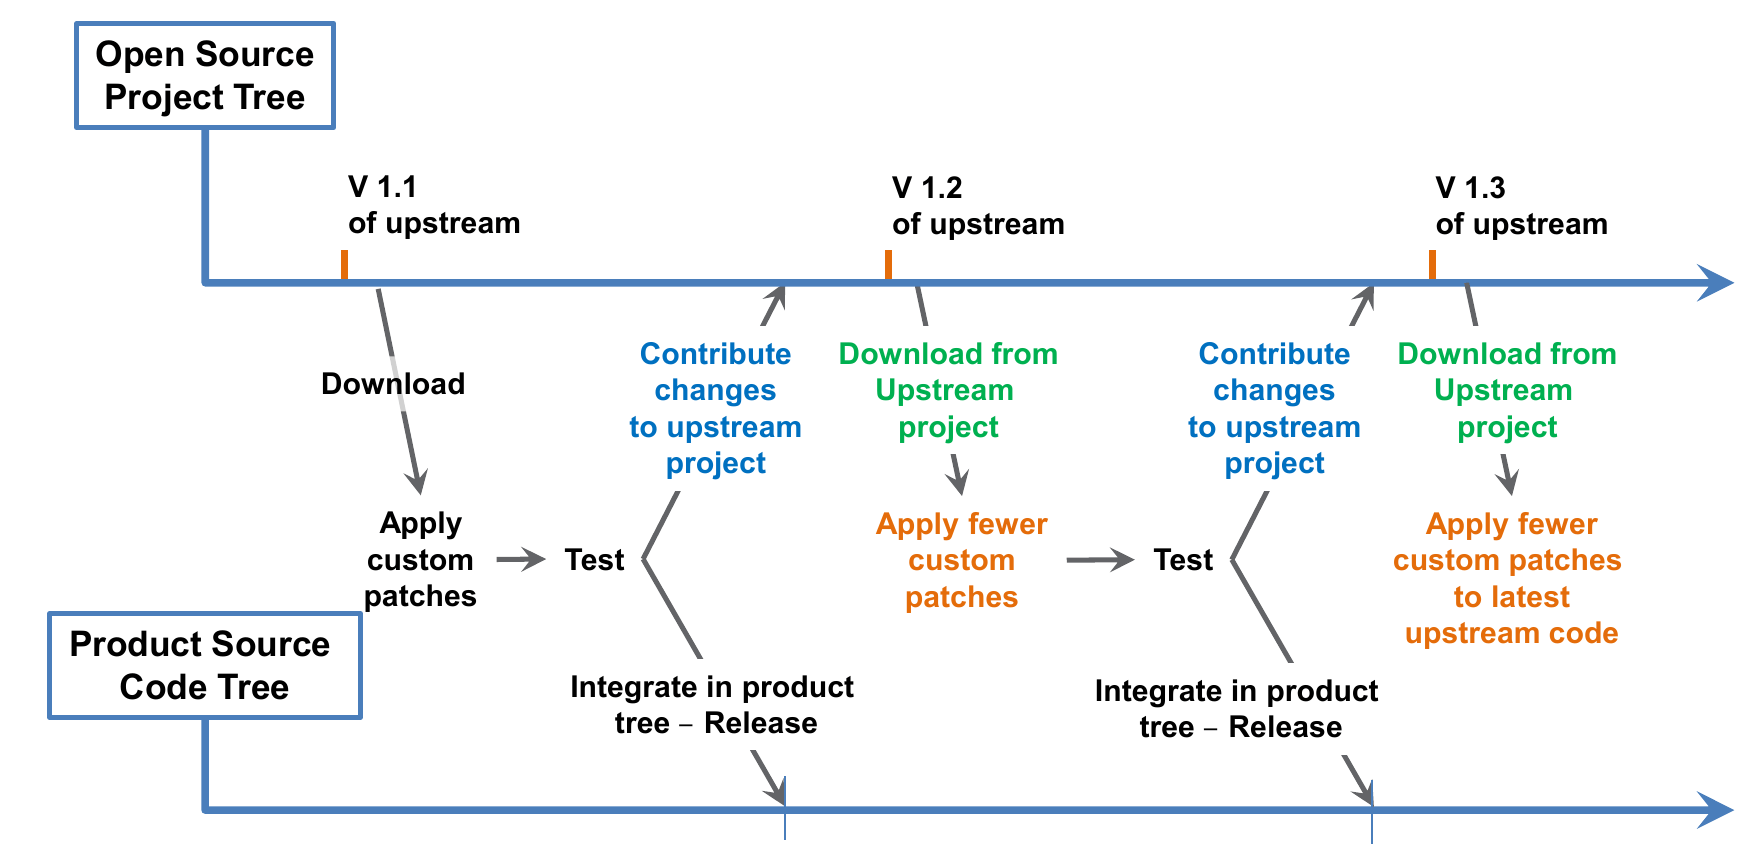 Similar development process with upstreaming to reduce in-house adaptation